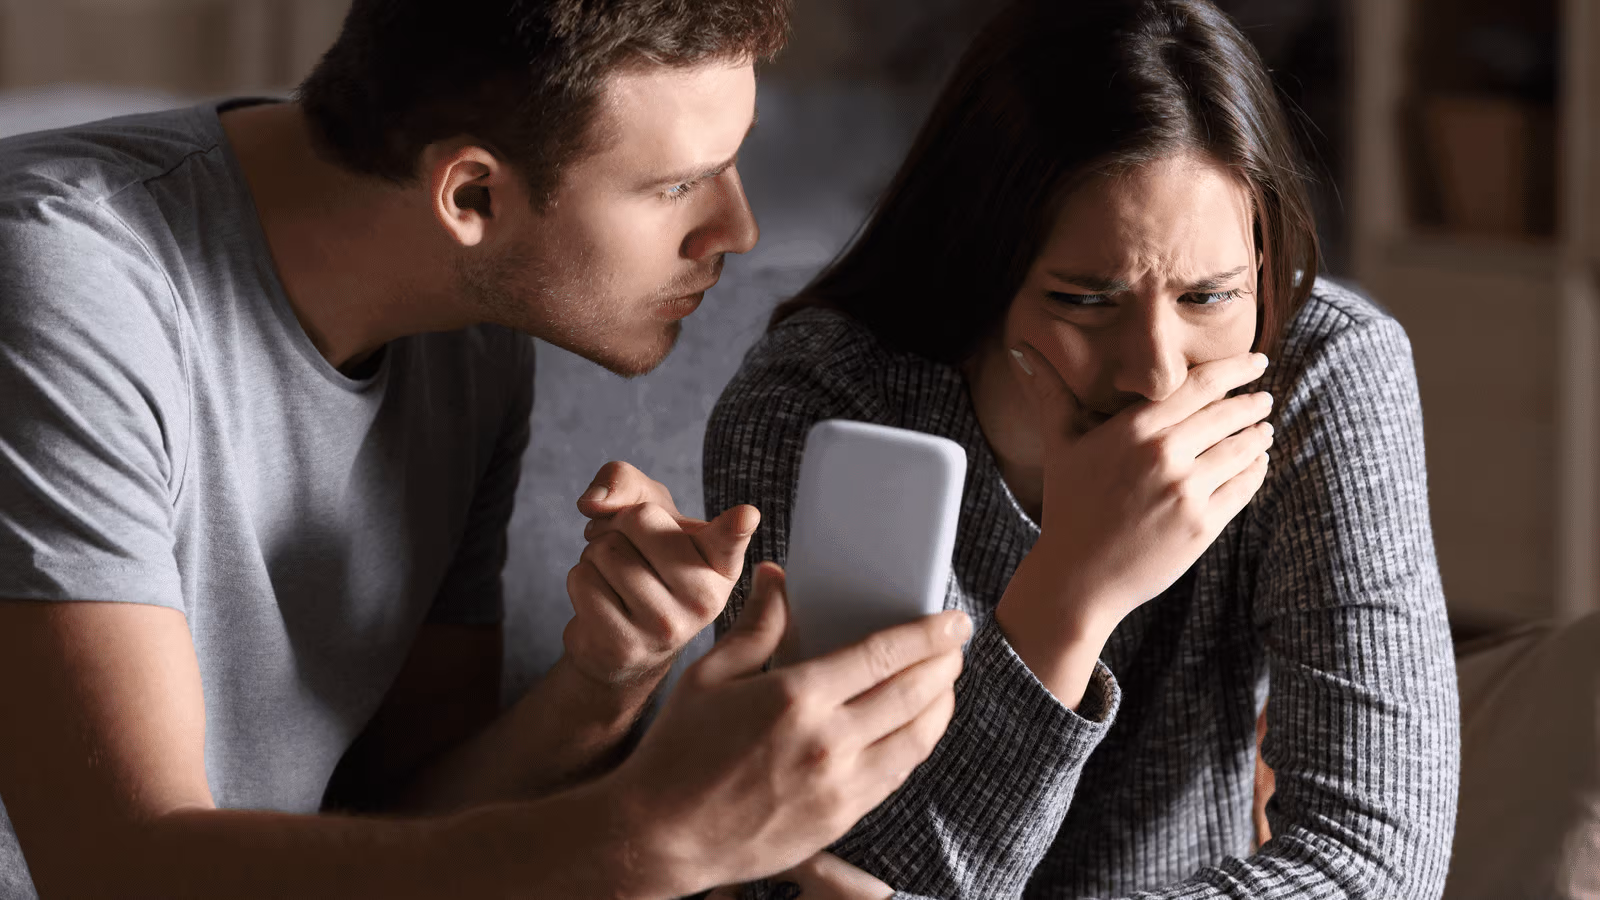 A man who's found out his partner is cheating on him via text messages.